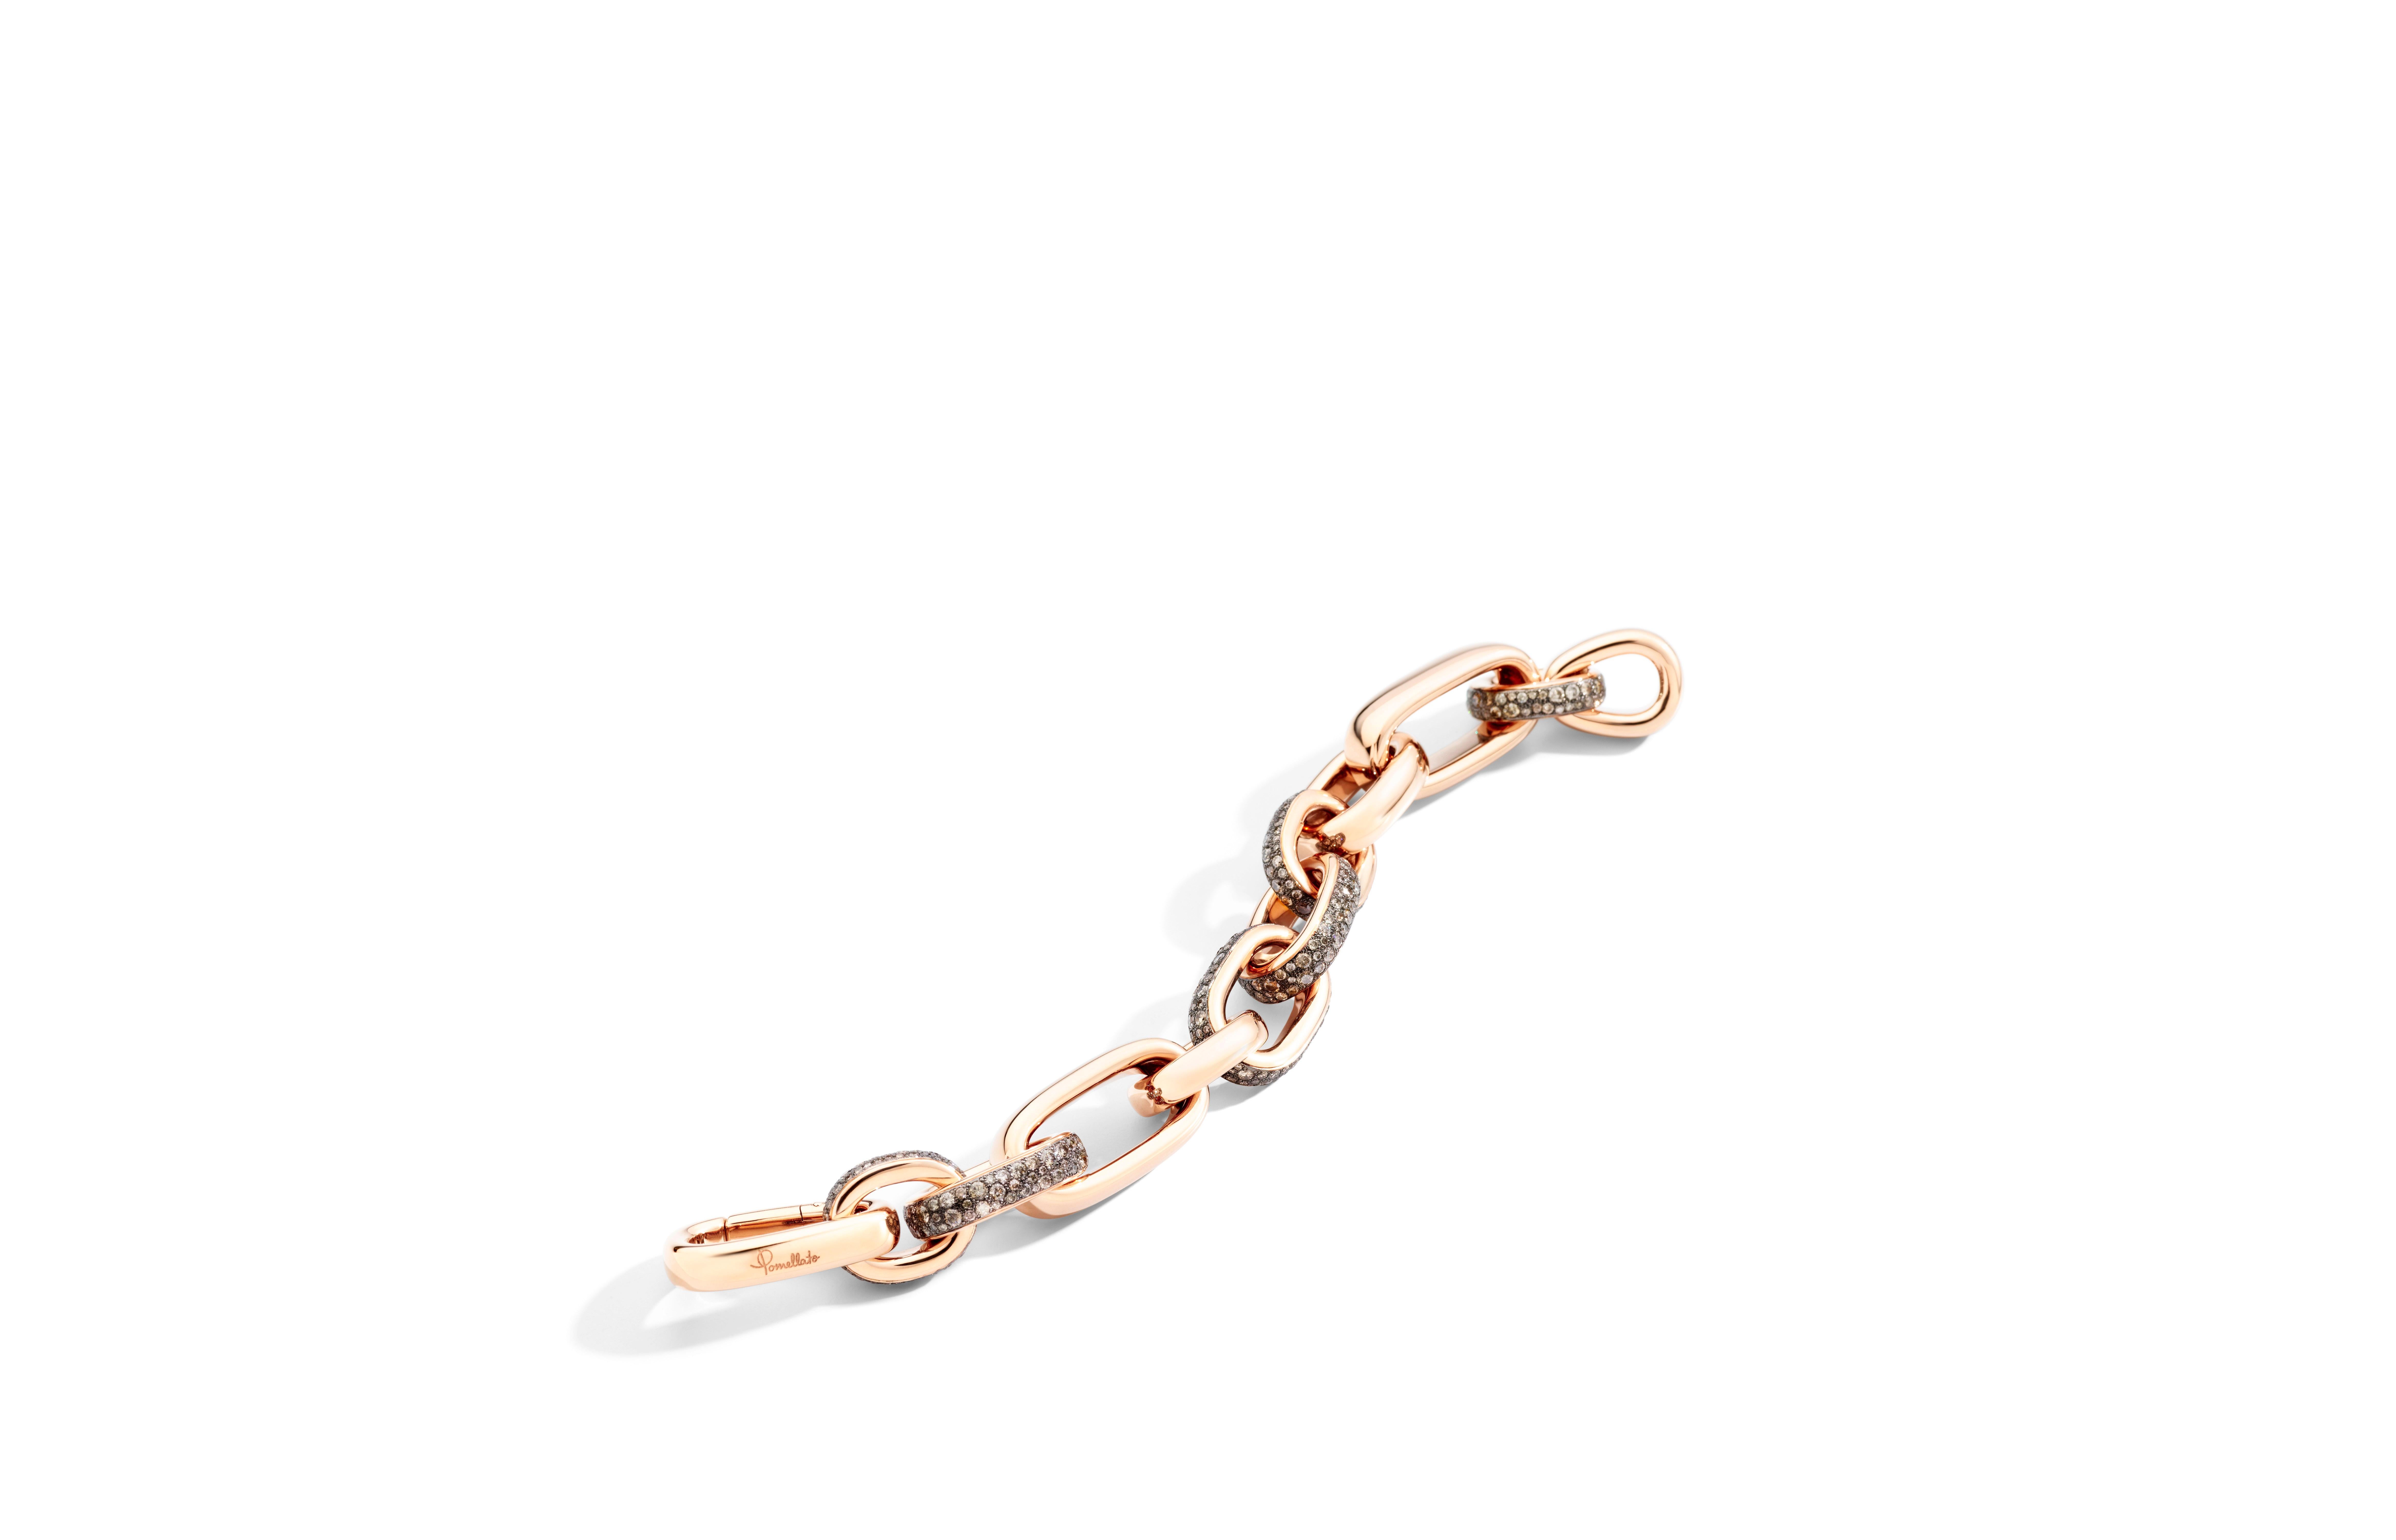 Honoring Pomellato’s goldsmith heritage, ICONICA shines in bold bracelets of sensual rose gold. Daring, lightweight and stackable, this anniversary collection may be mixed-and-matched per the Pomellato spirit. 18k rose gold with pave set brown